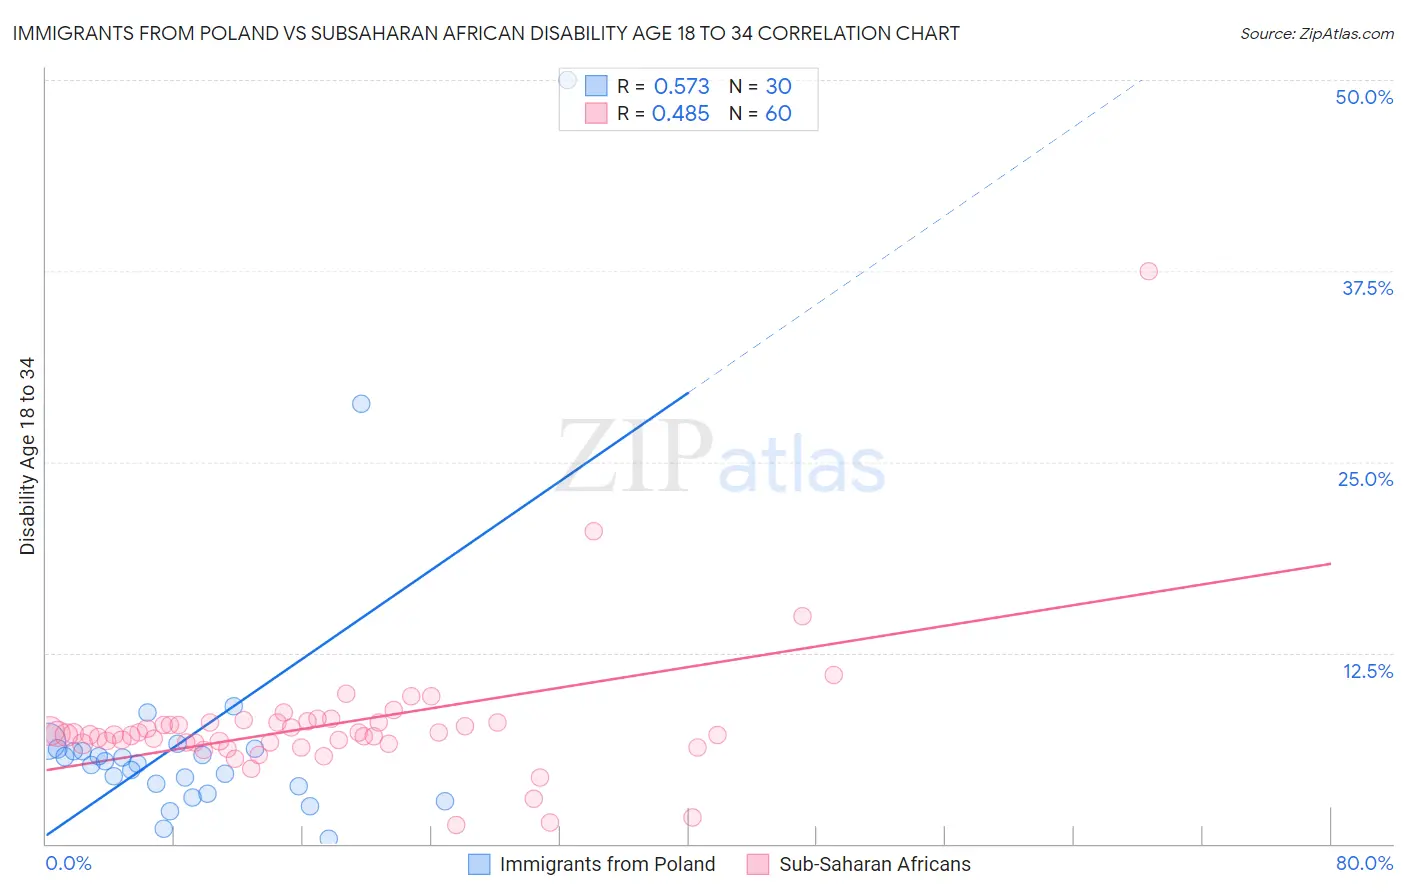 Immigrants from Poland vs Subsaharan African Disability Age 18 to 34